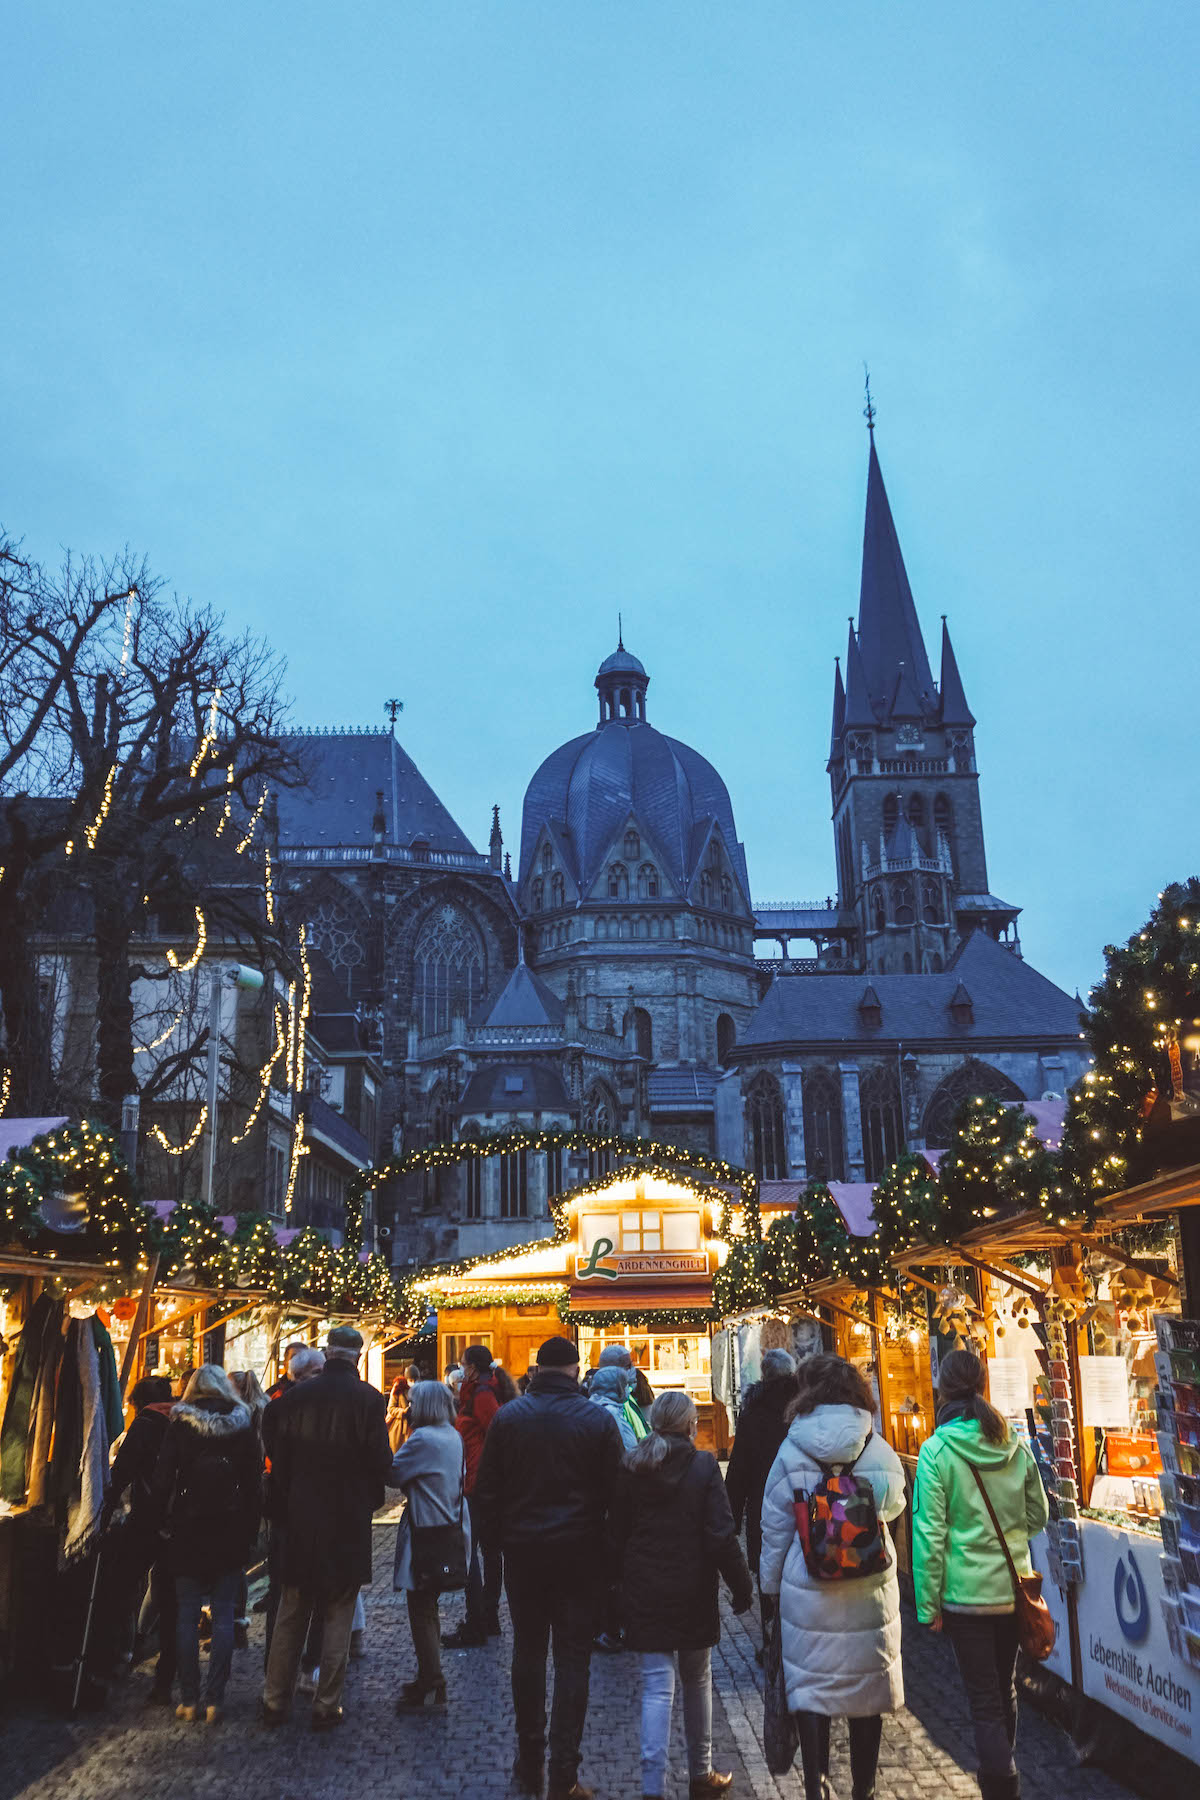 Aachen cathedral with Christmas market in foreground